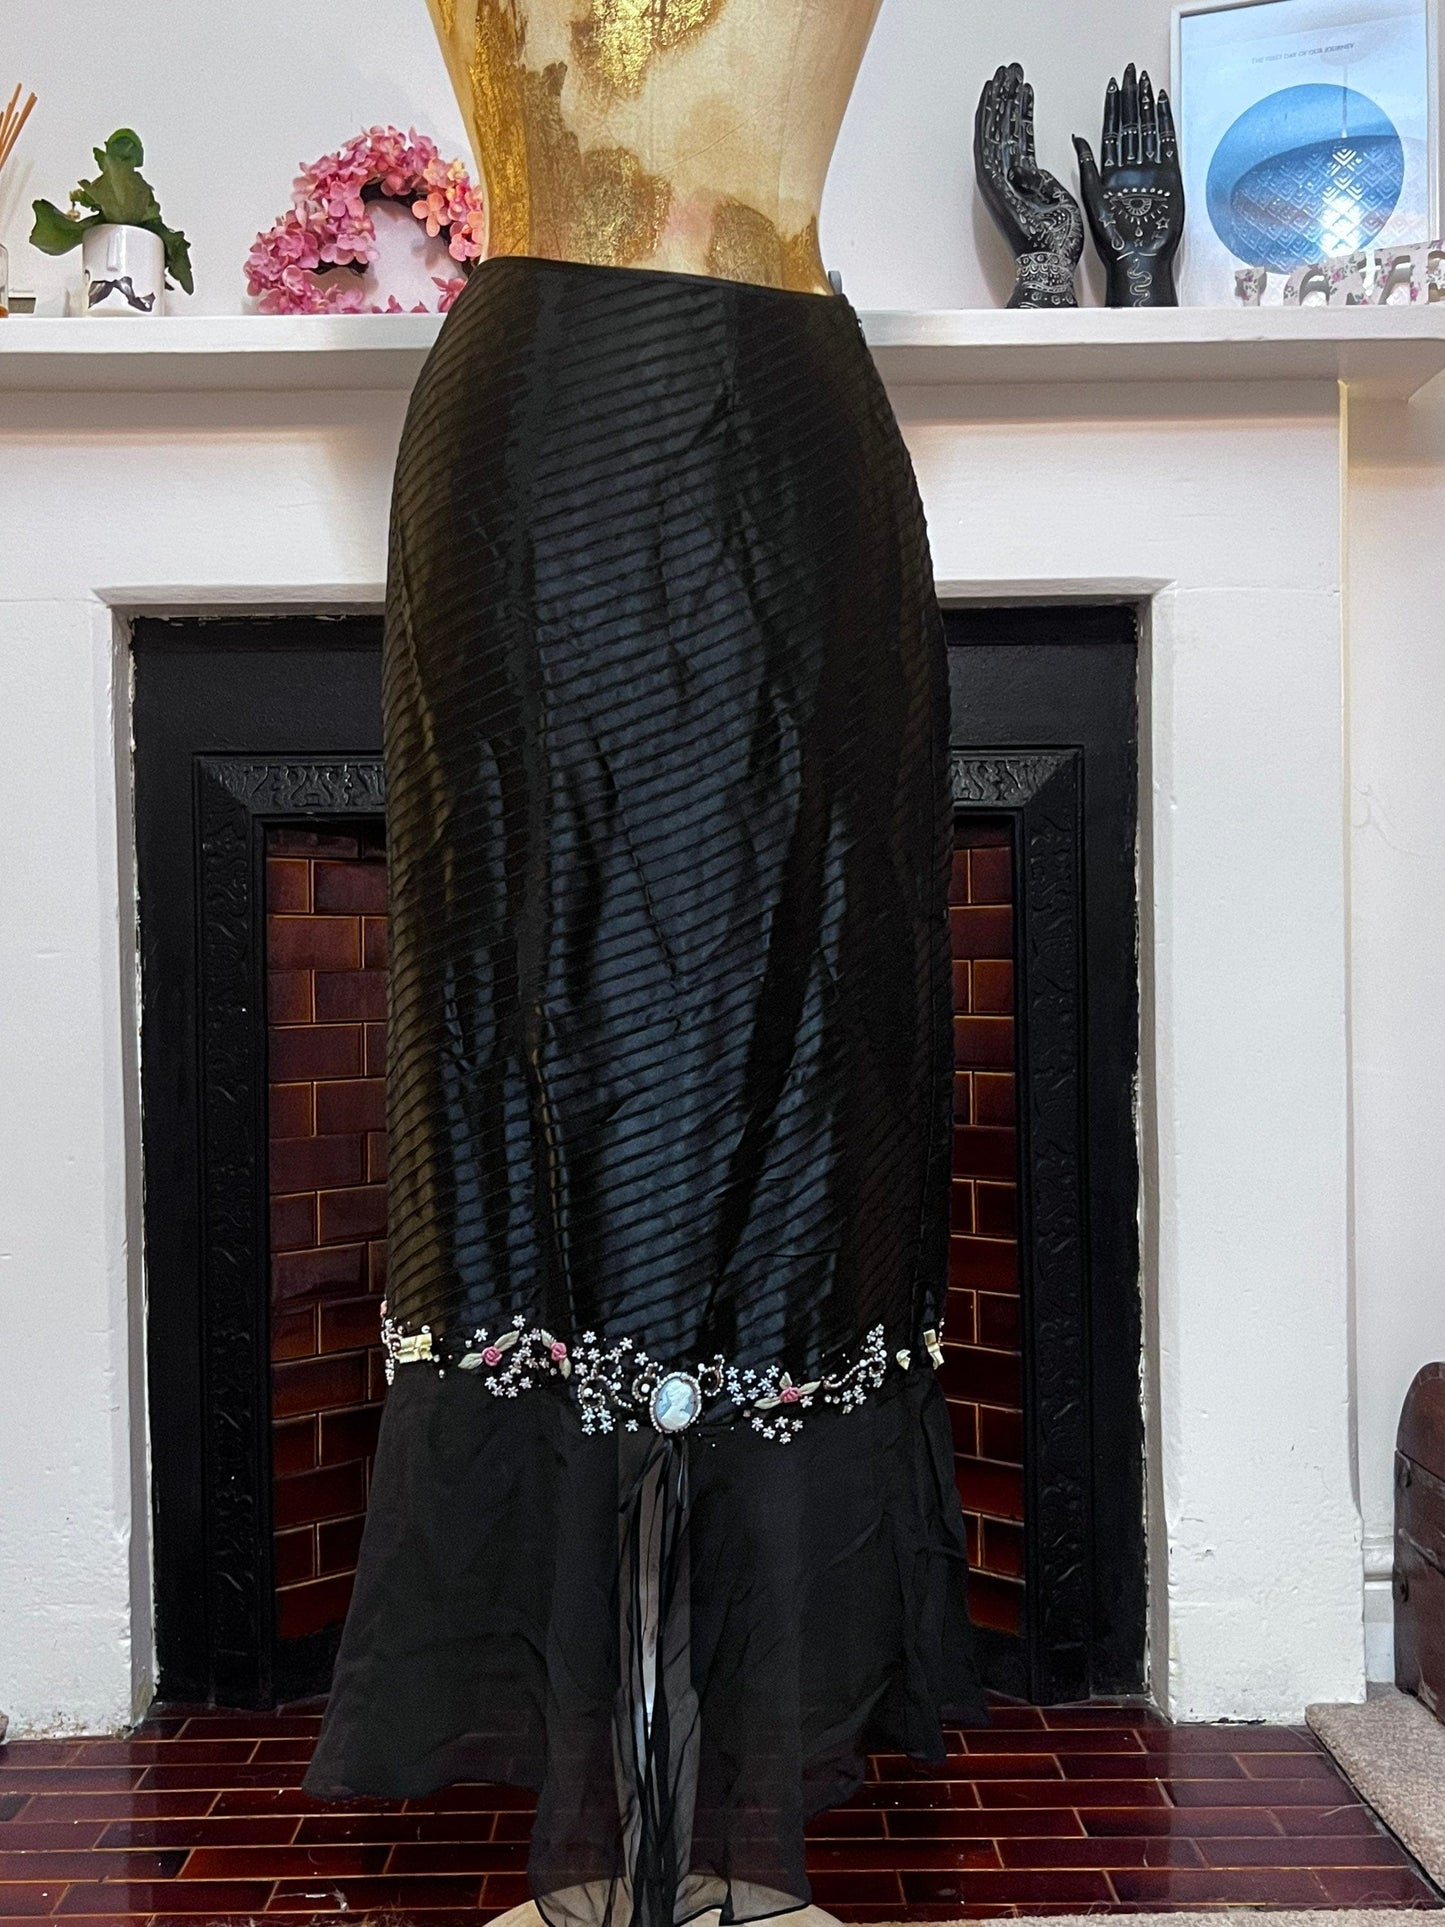 Vintage Black Skirt Silk Viscose Victorian Style Skirt - Press & Bastyan Chiffon over layer skirt UK12 Black with floral beaded detail layer